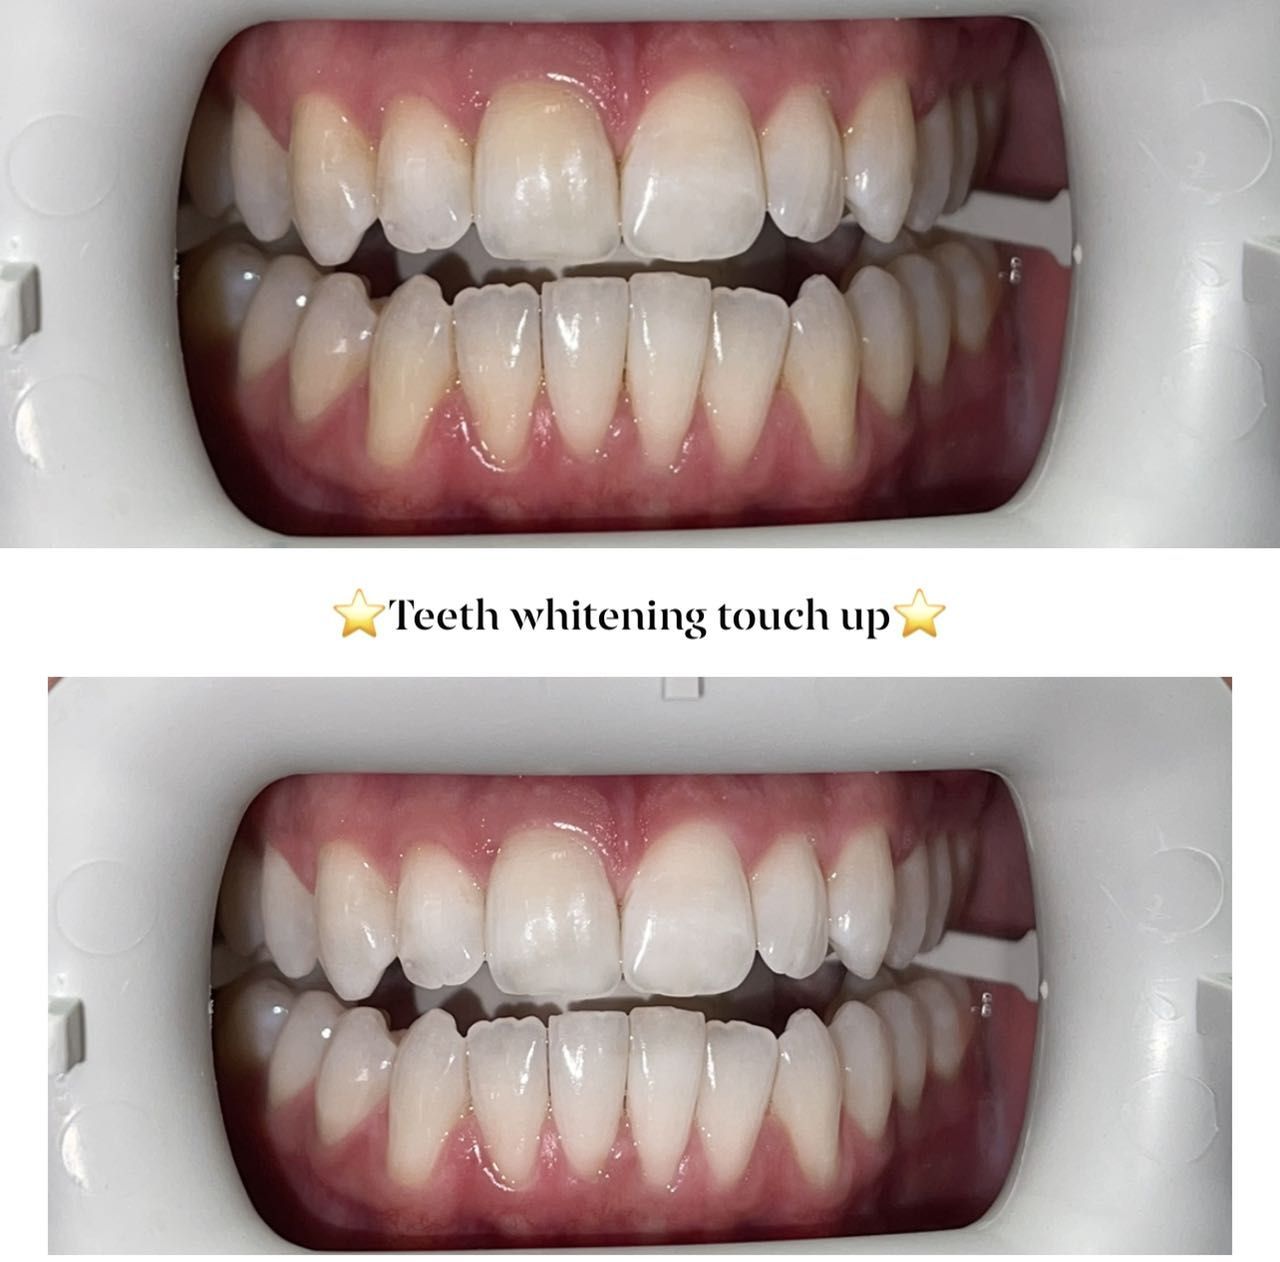 Teeth whitening touch up only portfolio